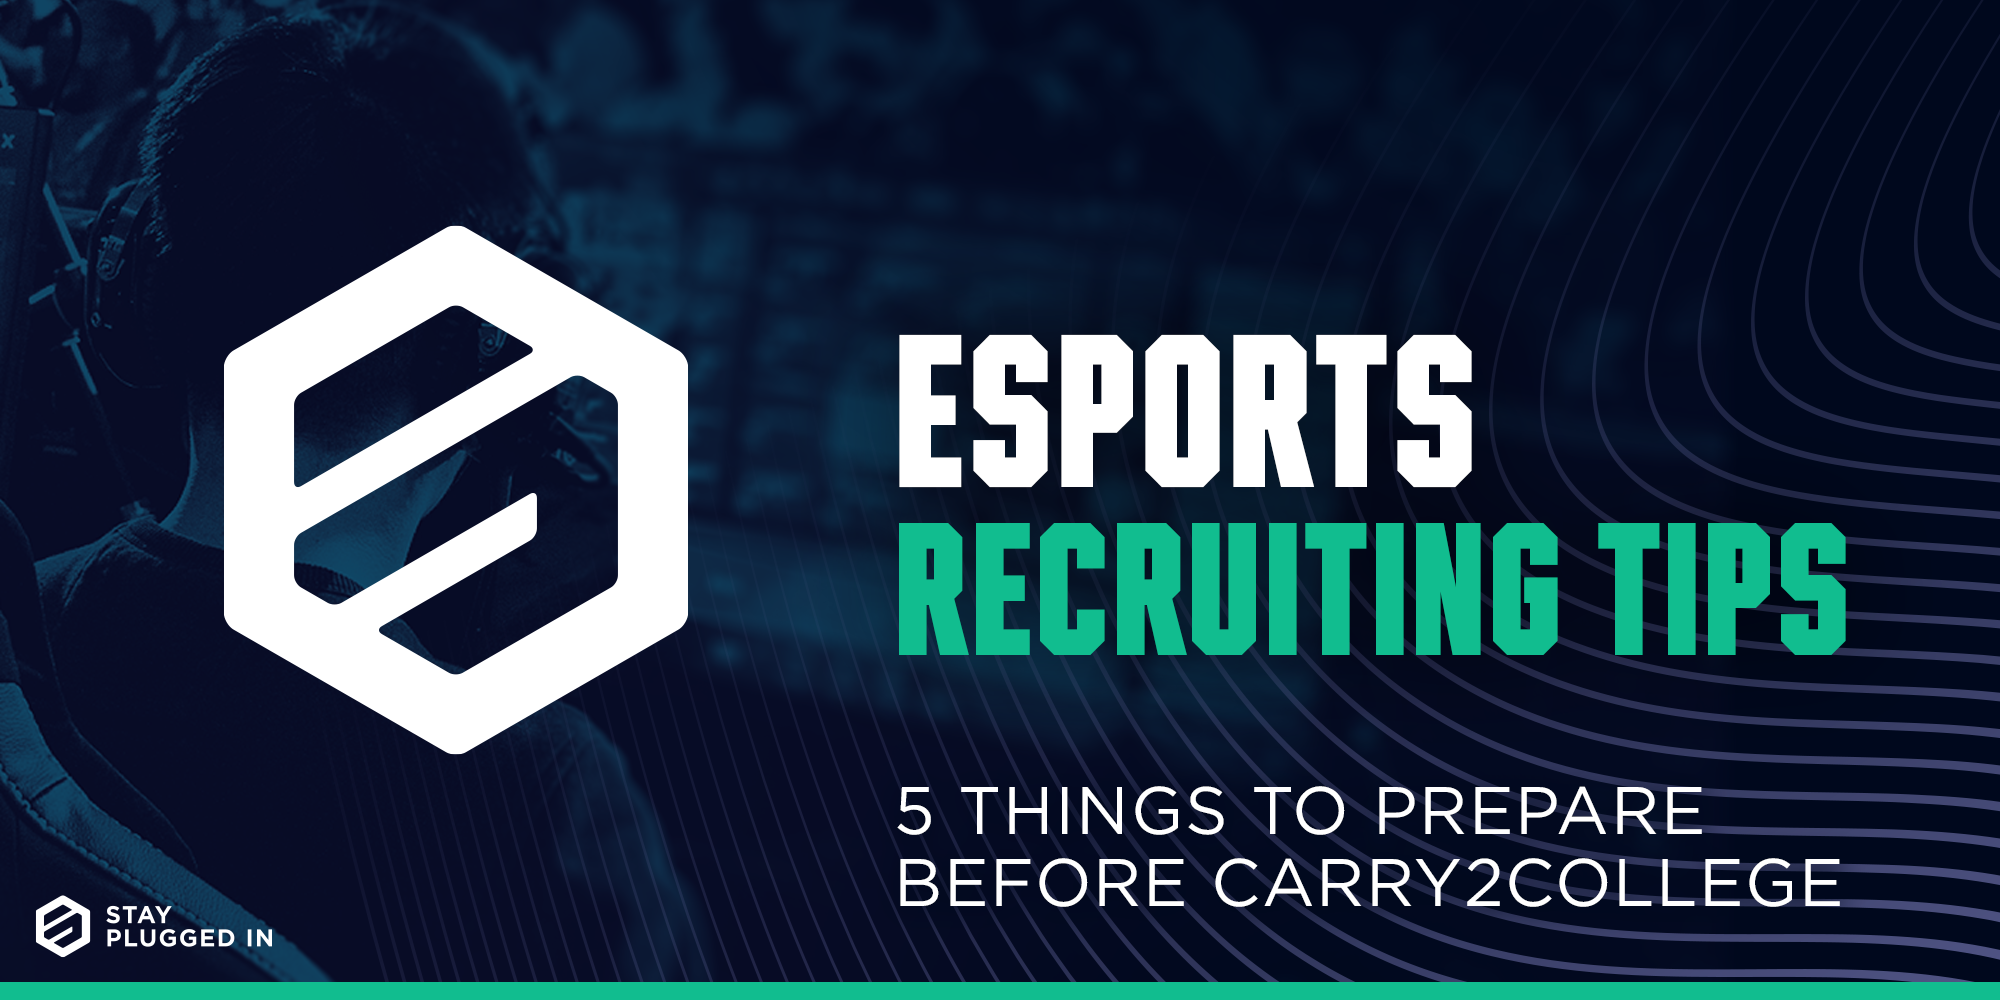 Esports Recruiting Tips: 5 Things You Need to Prepare Before Carry2College